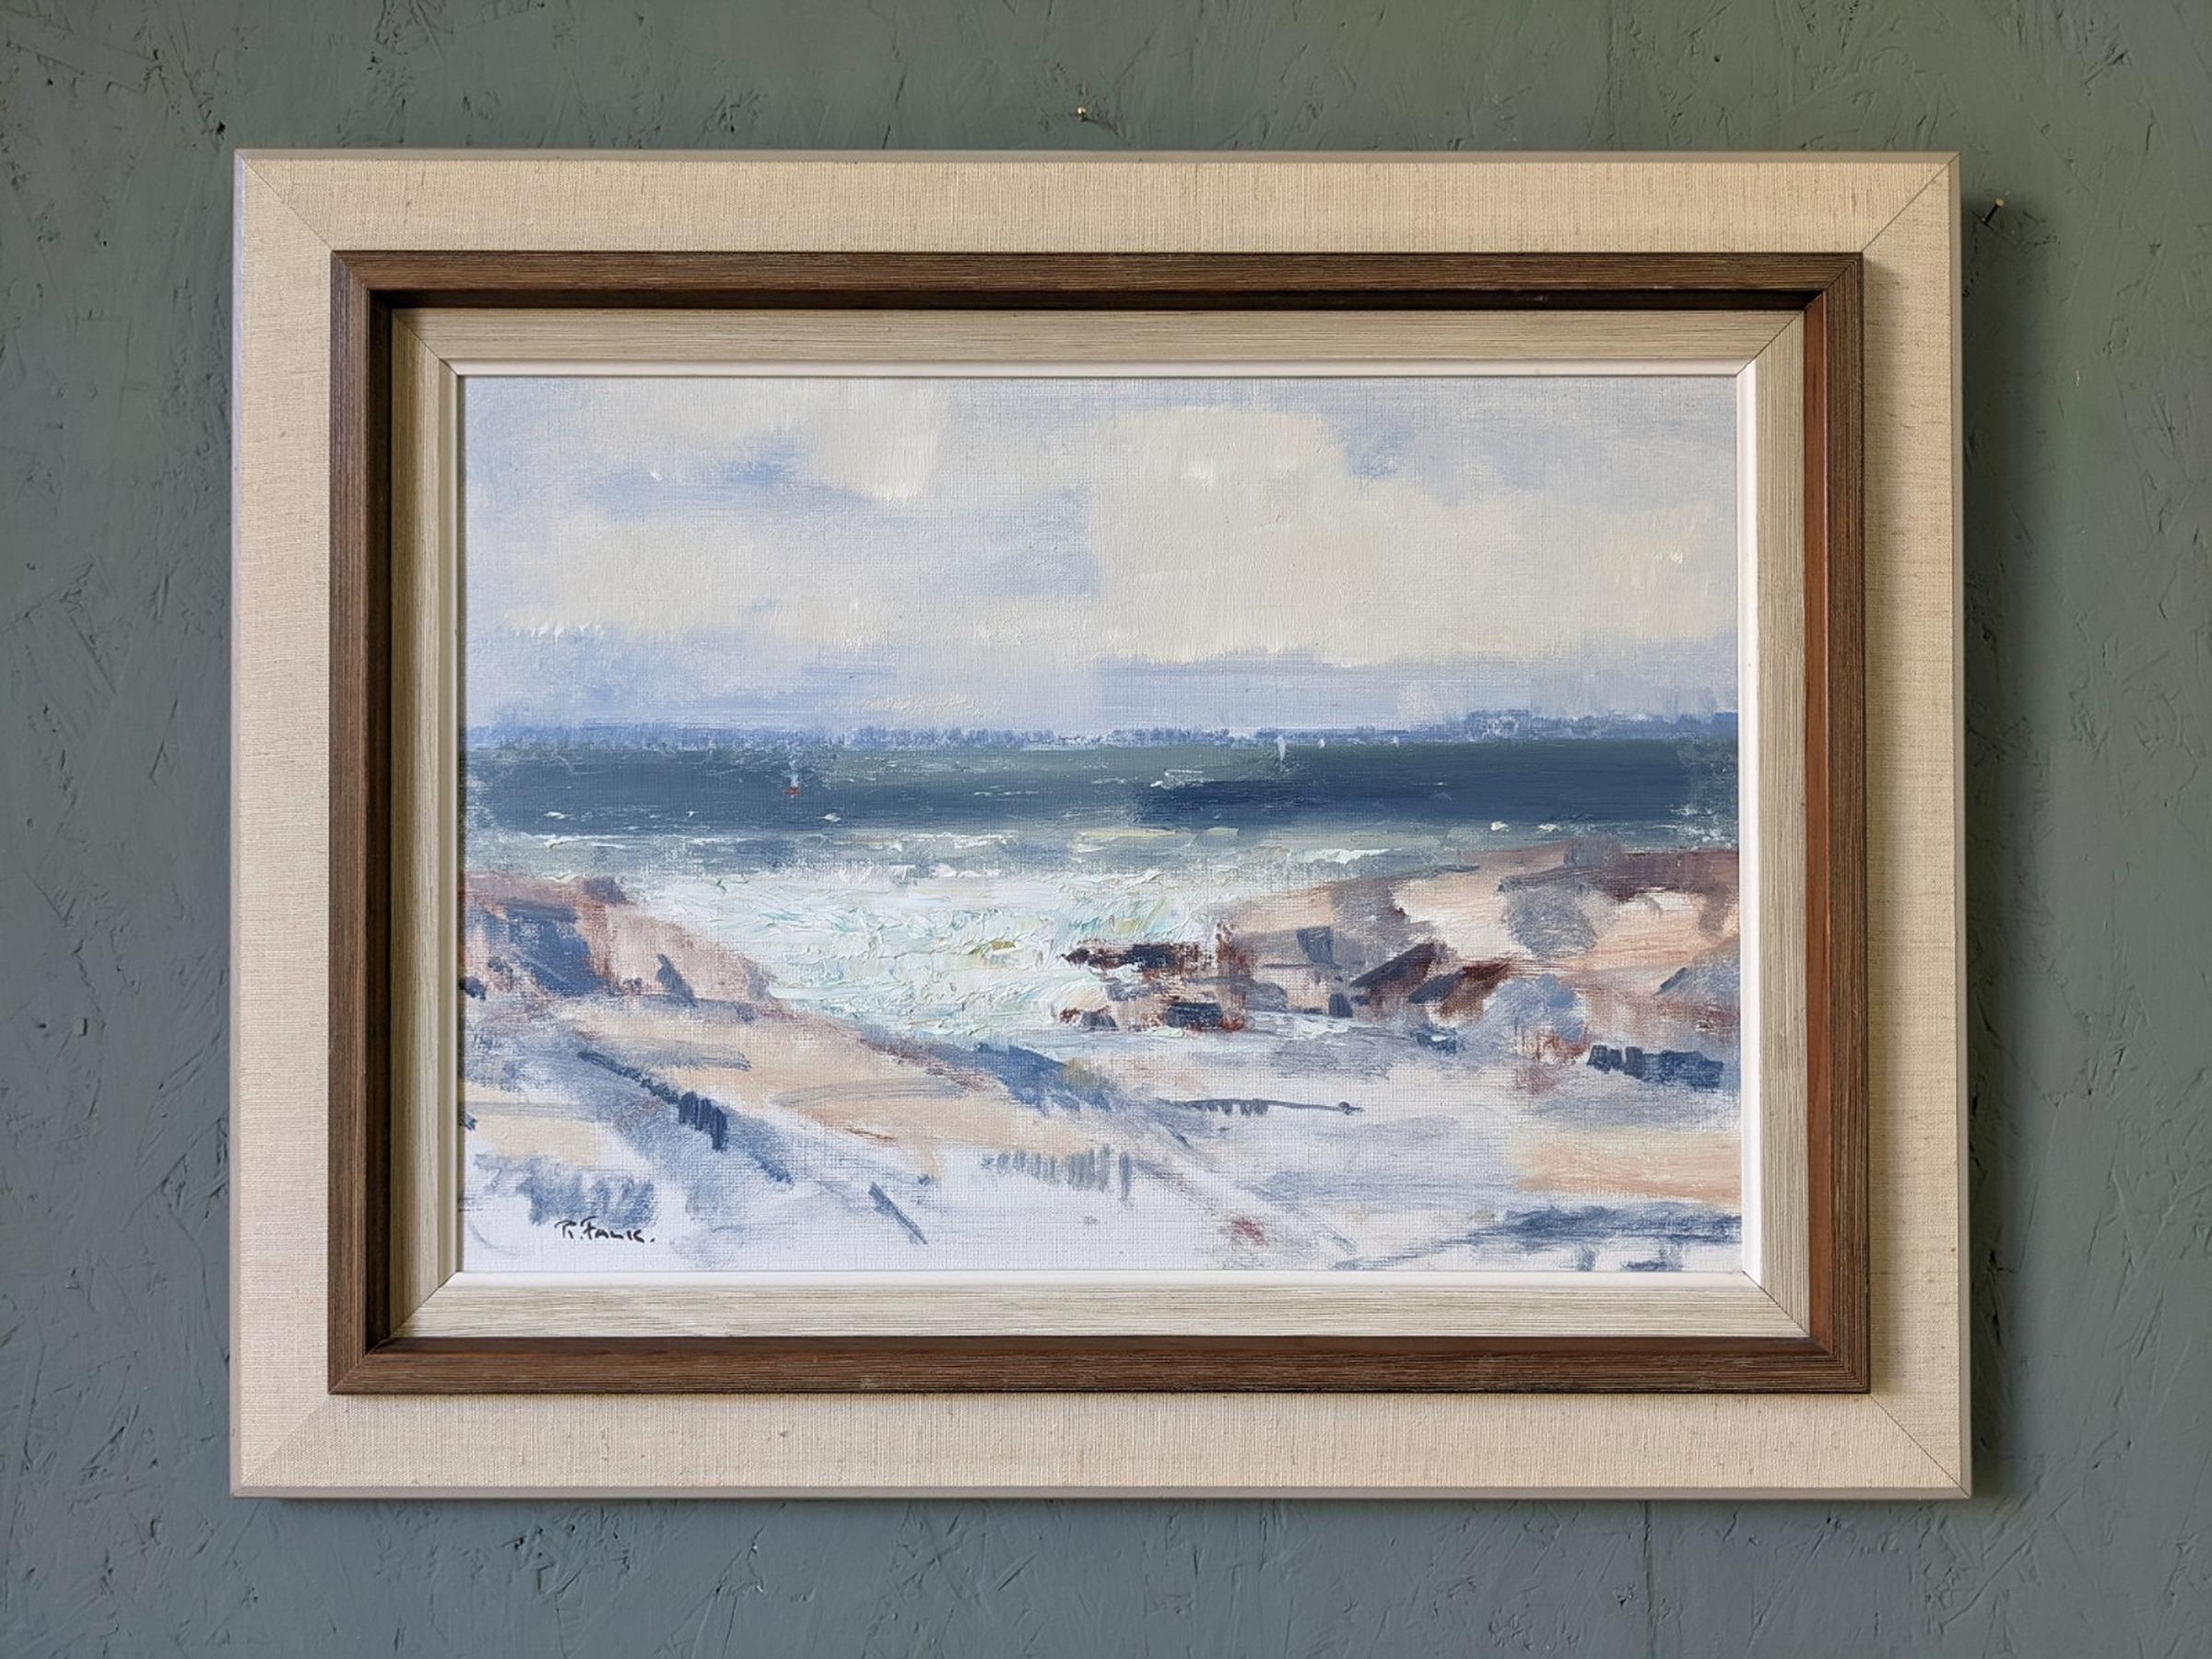 TIDE
Size: 49 x 63 cm (including frame)
Oil on Canvas

A restful and atmospheric mid-century modernist coastal scape painting, executed in oil onto canvas.

Painted in a semi-abstract manner, the artist has captured the beauty of the forces of